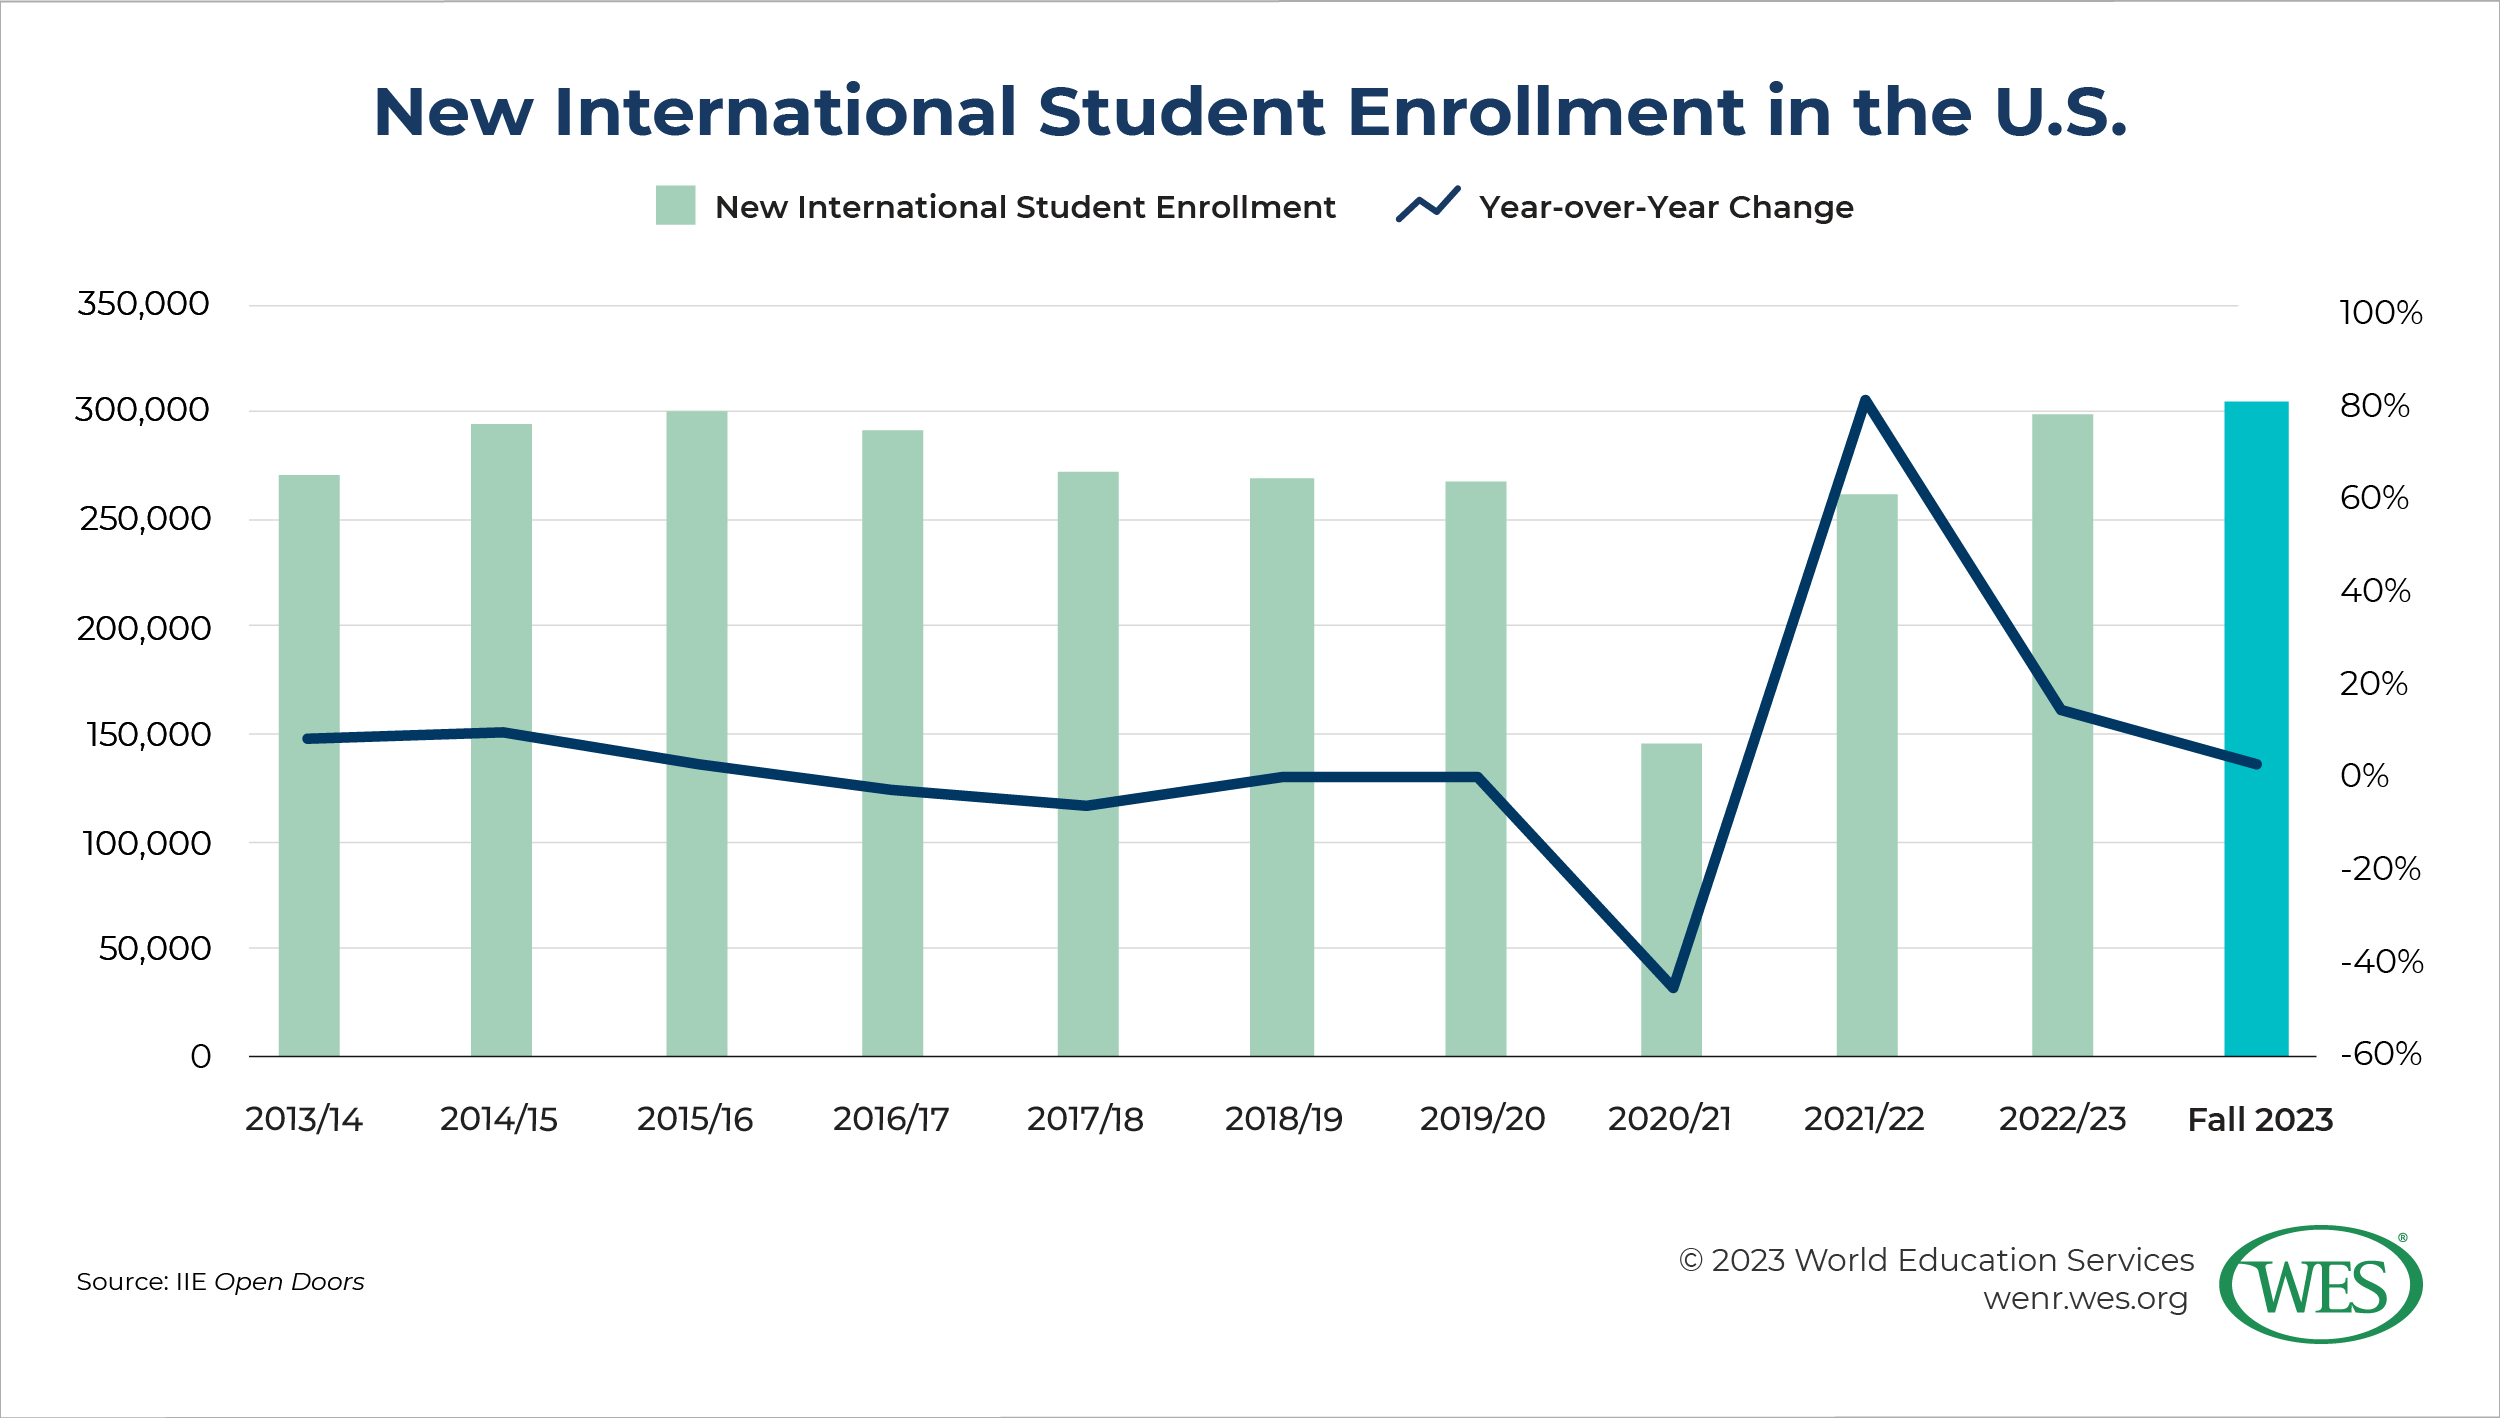 A chart showing enrollment and annual growth of new international students in the U.S. in between 2013/14 and 2022/23. 